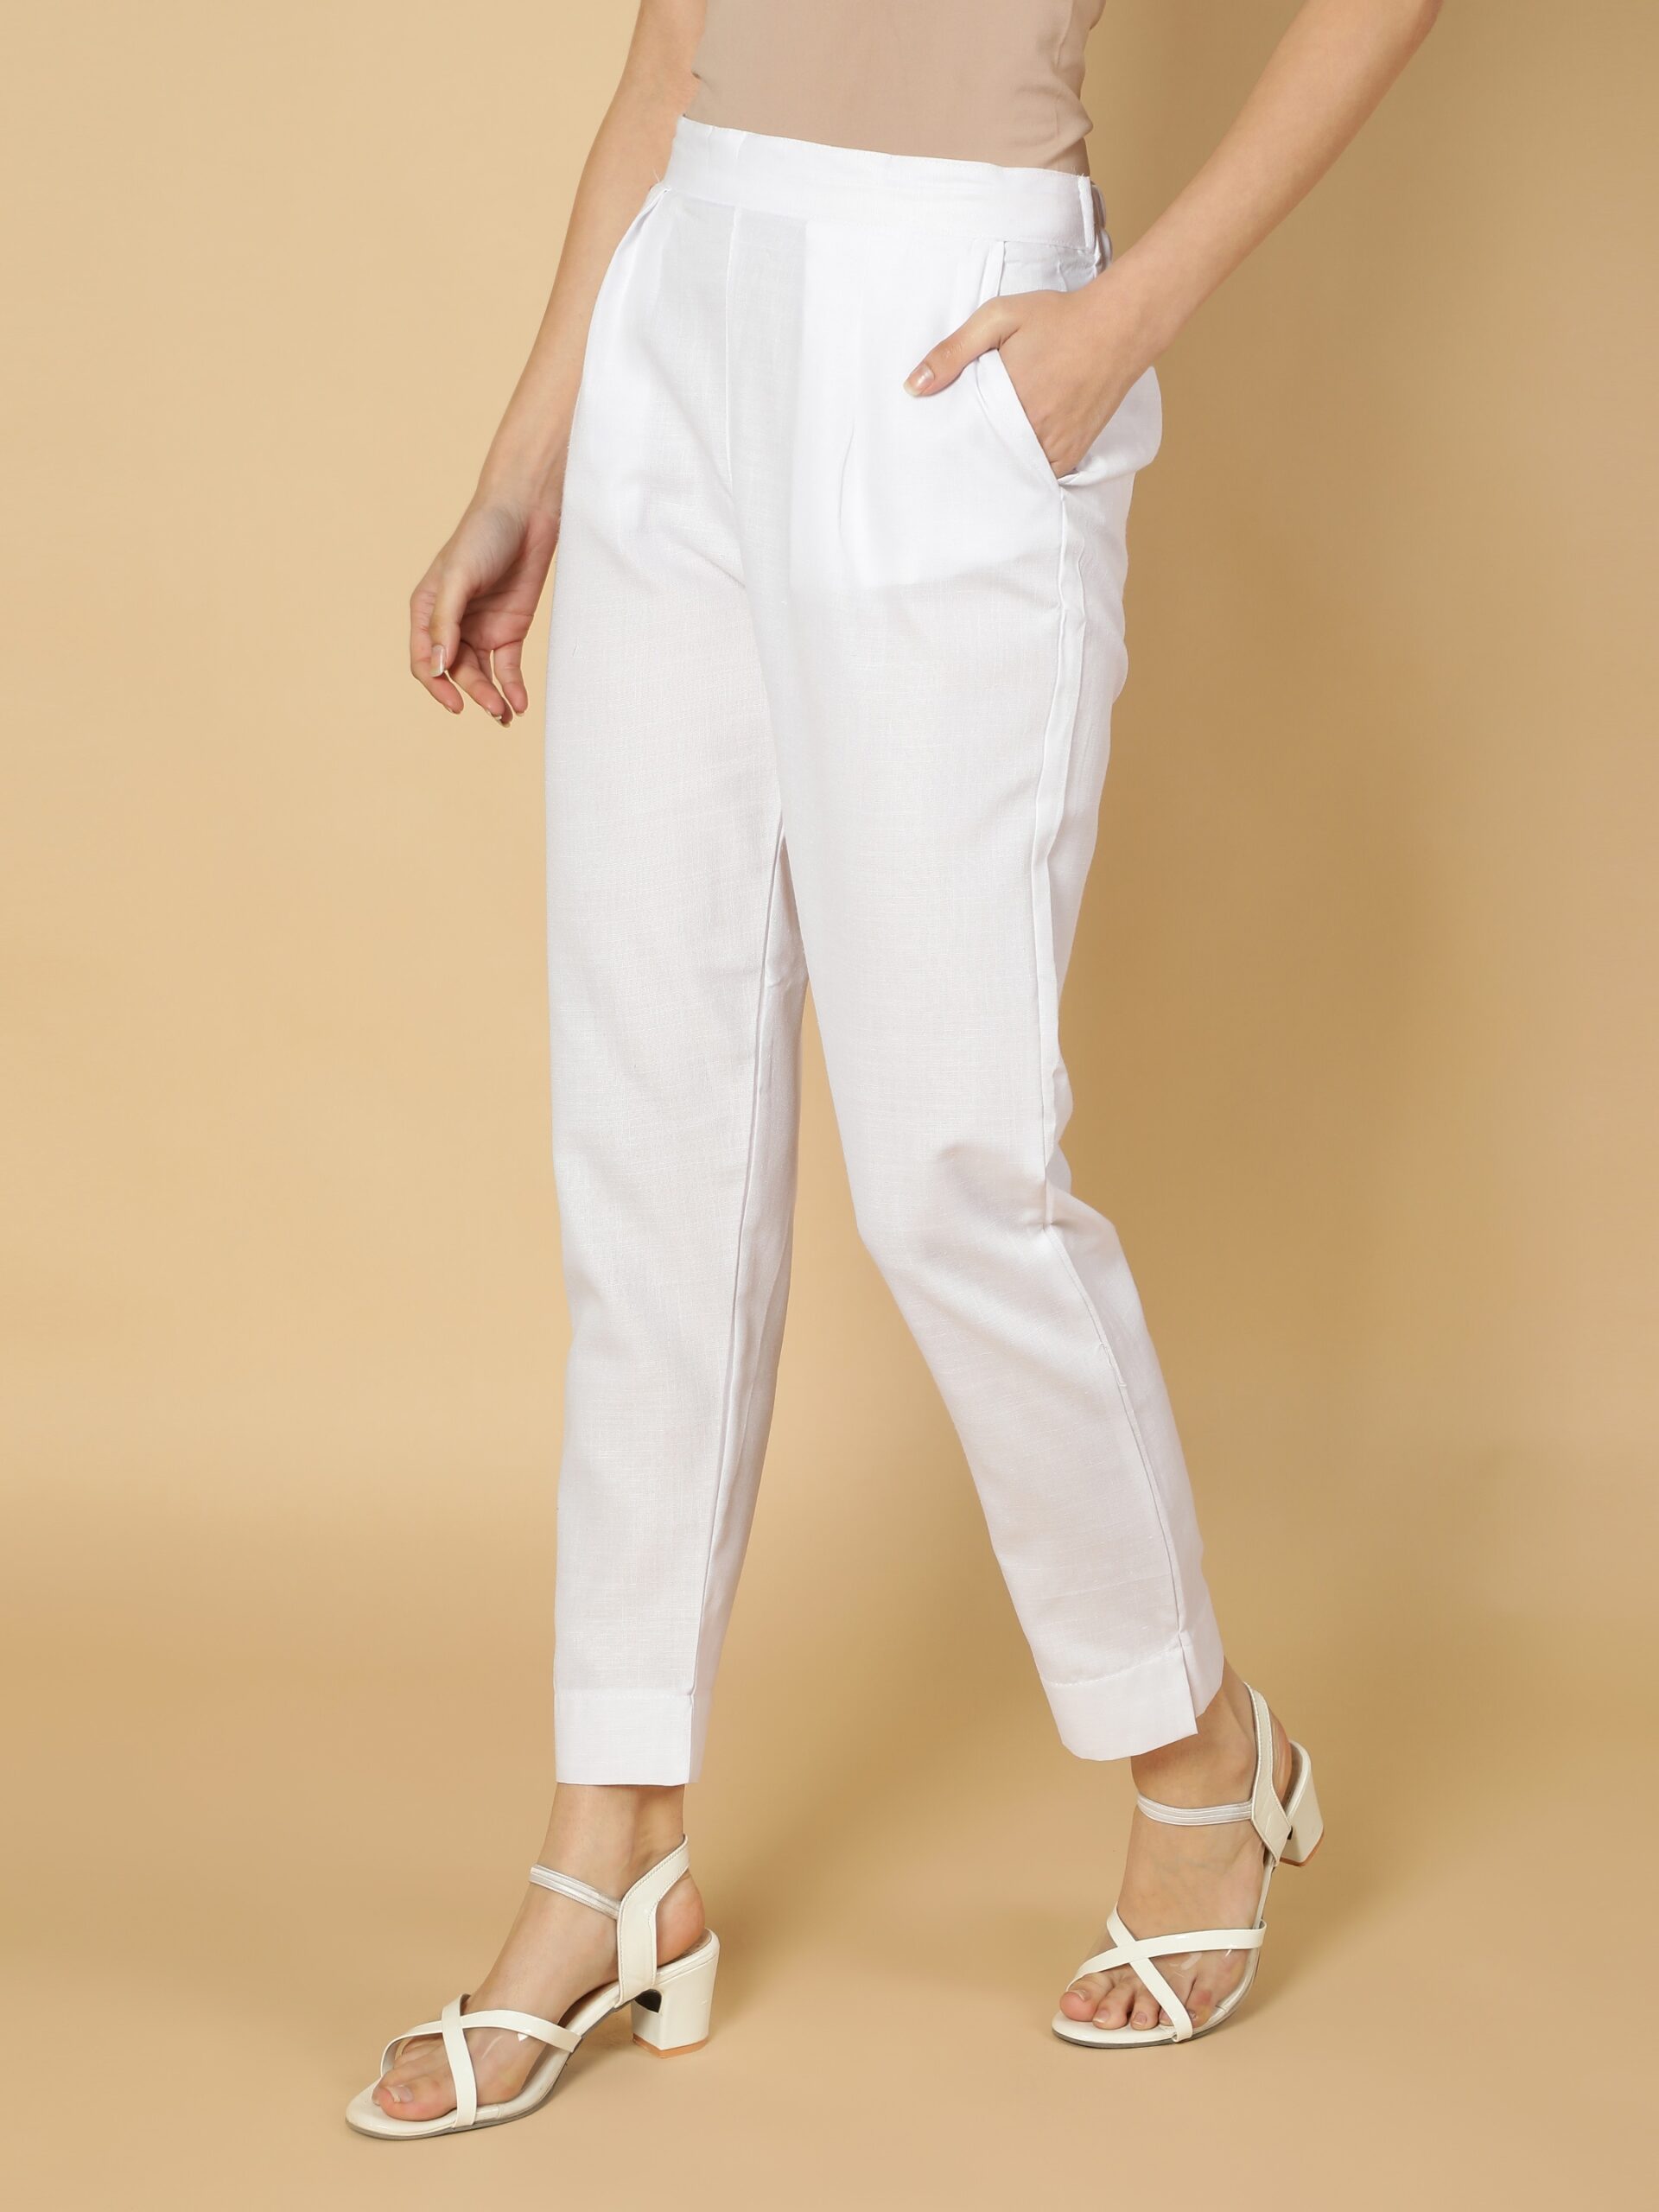 Buy OFF-WHITE Trousers & Lowers online - Women - 159 products | FASHIOLA  INDIA-anthinhphatland.vn